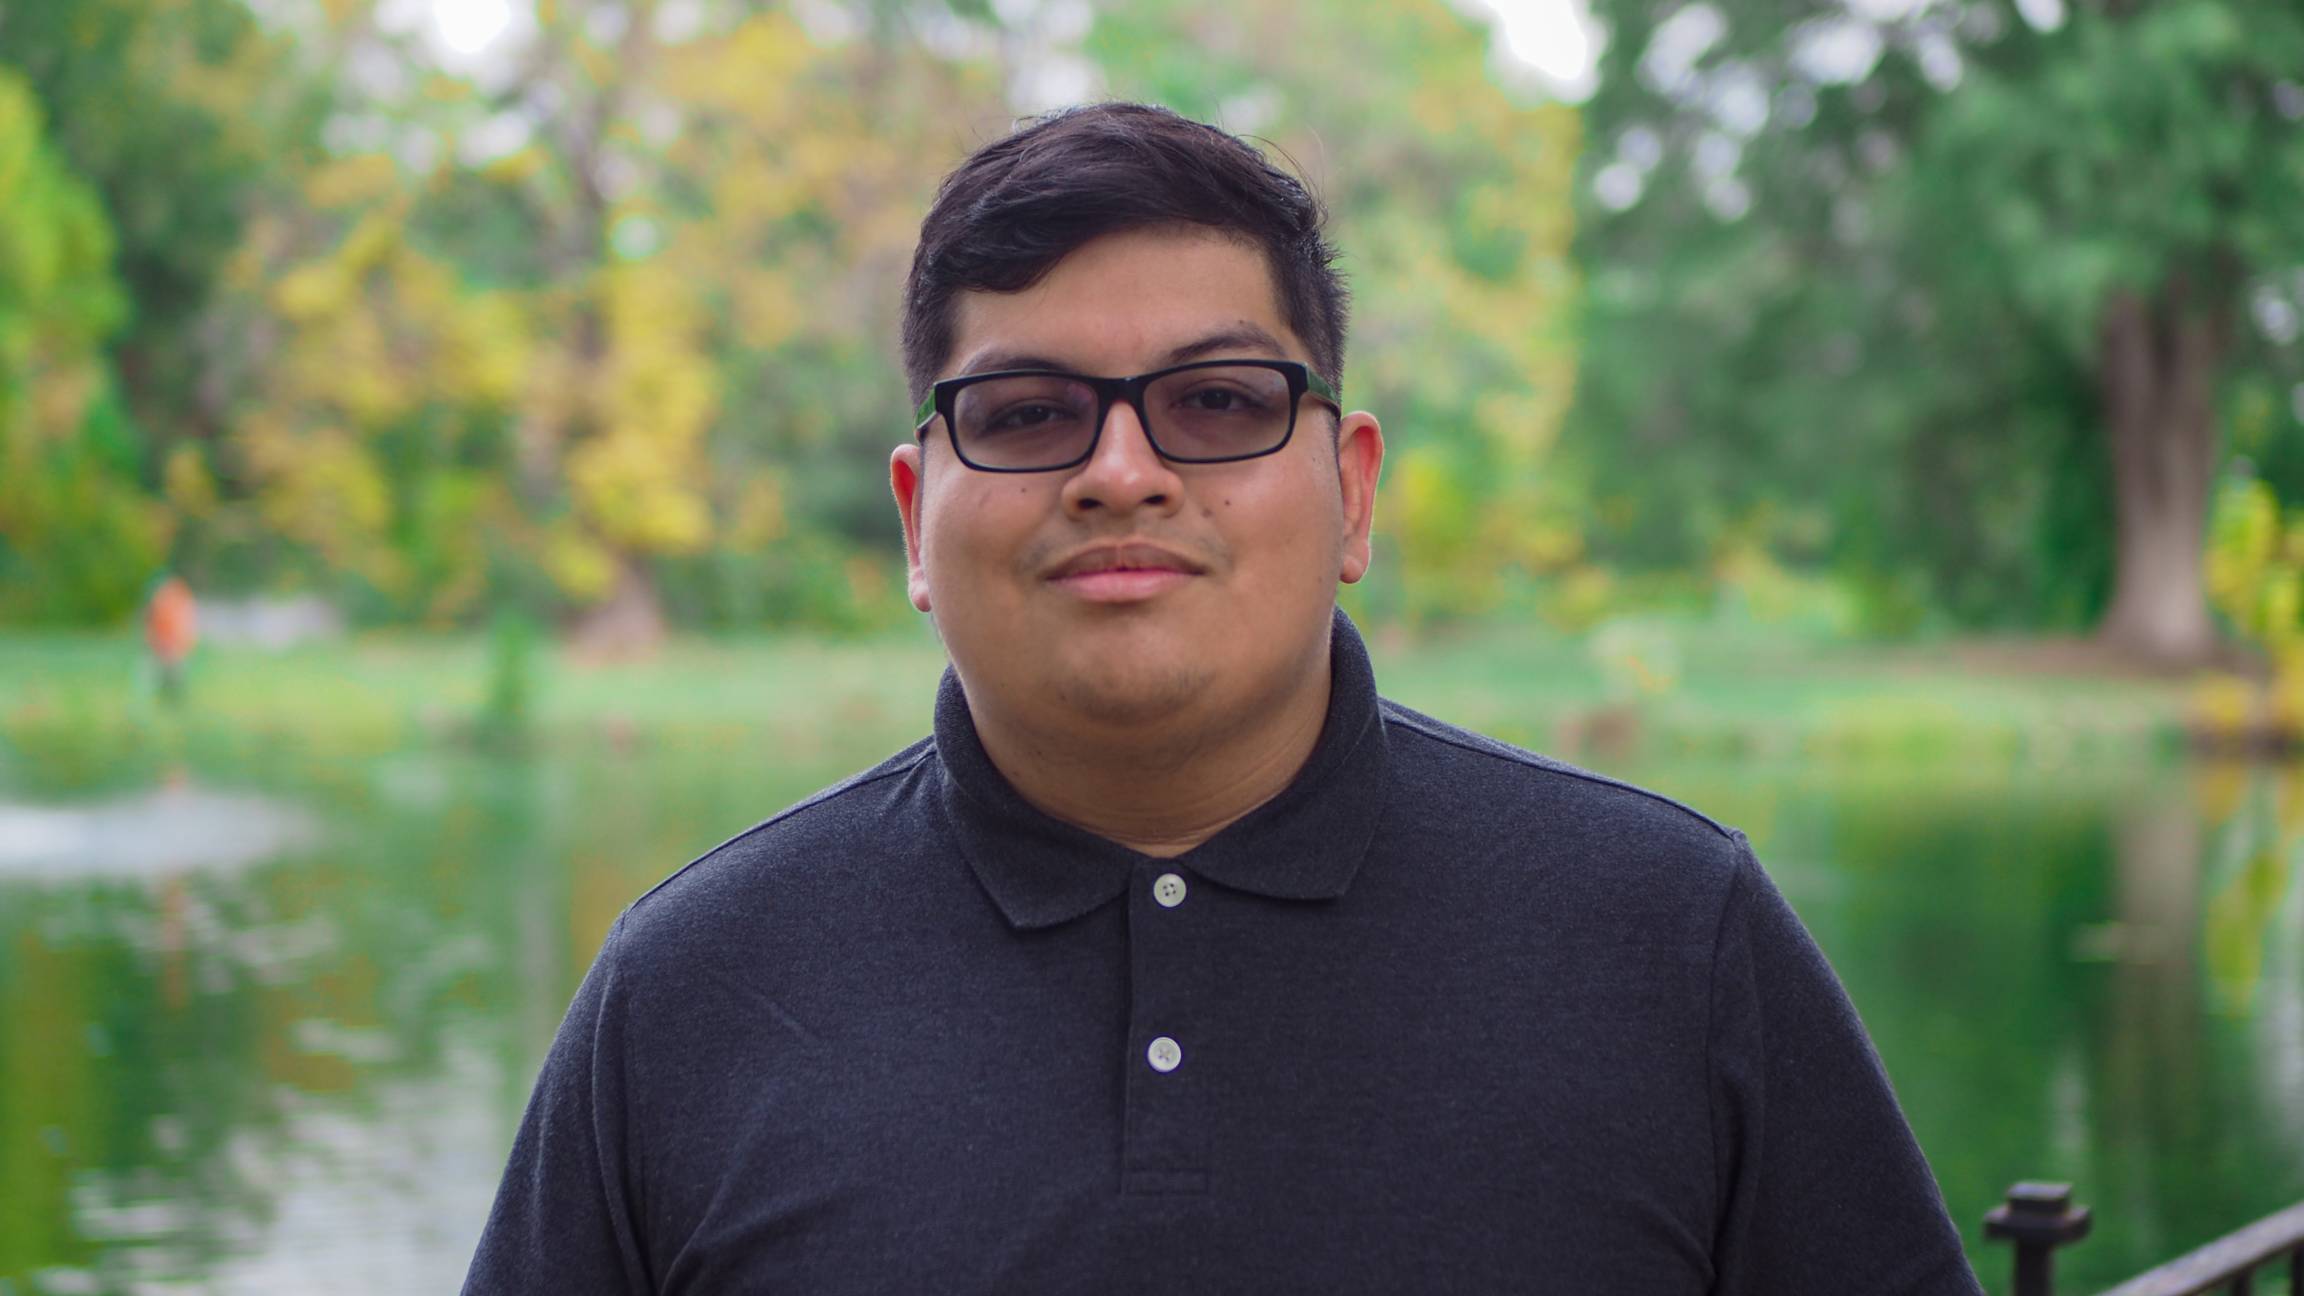 TXST civil engineering graduate student awarded a federal
transportation fellowship